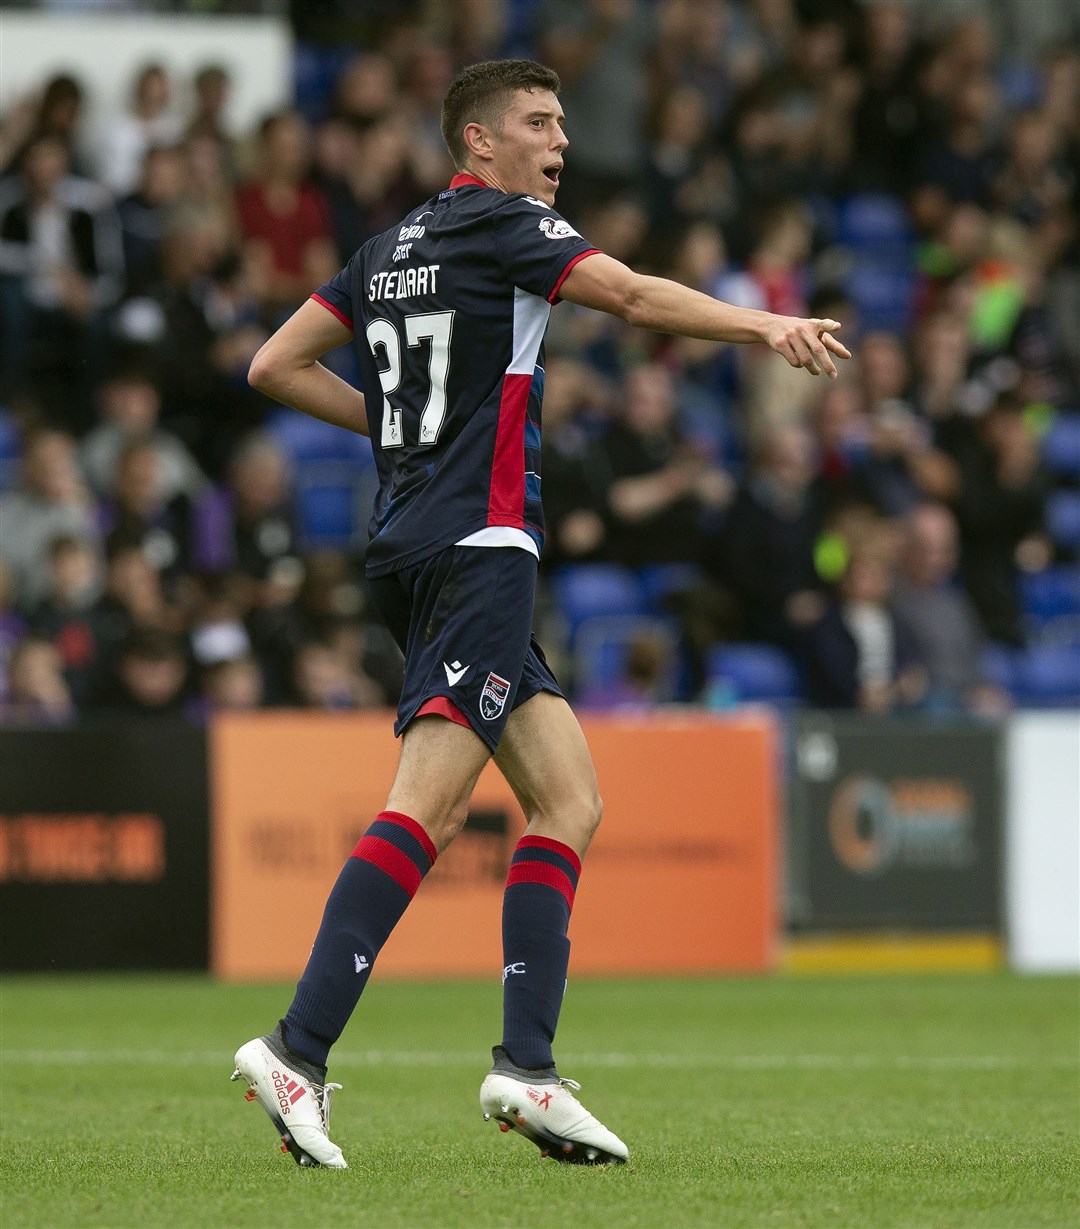 Picture - Ken Macpherson, Inverness. Ross County(1) v Livingston(4). 24.08.19. Ross County's Ross Stewart celebrates his goal.